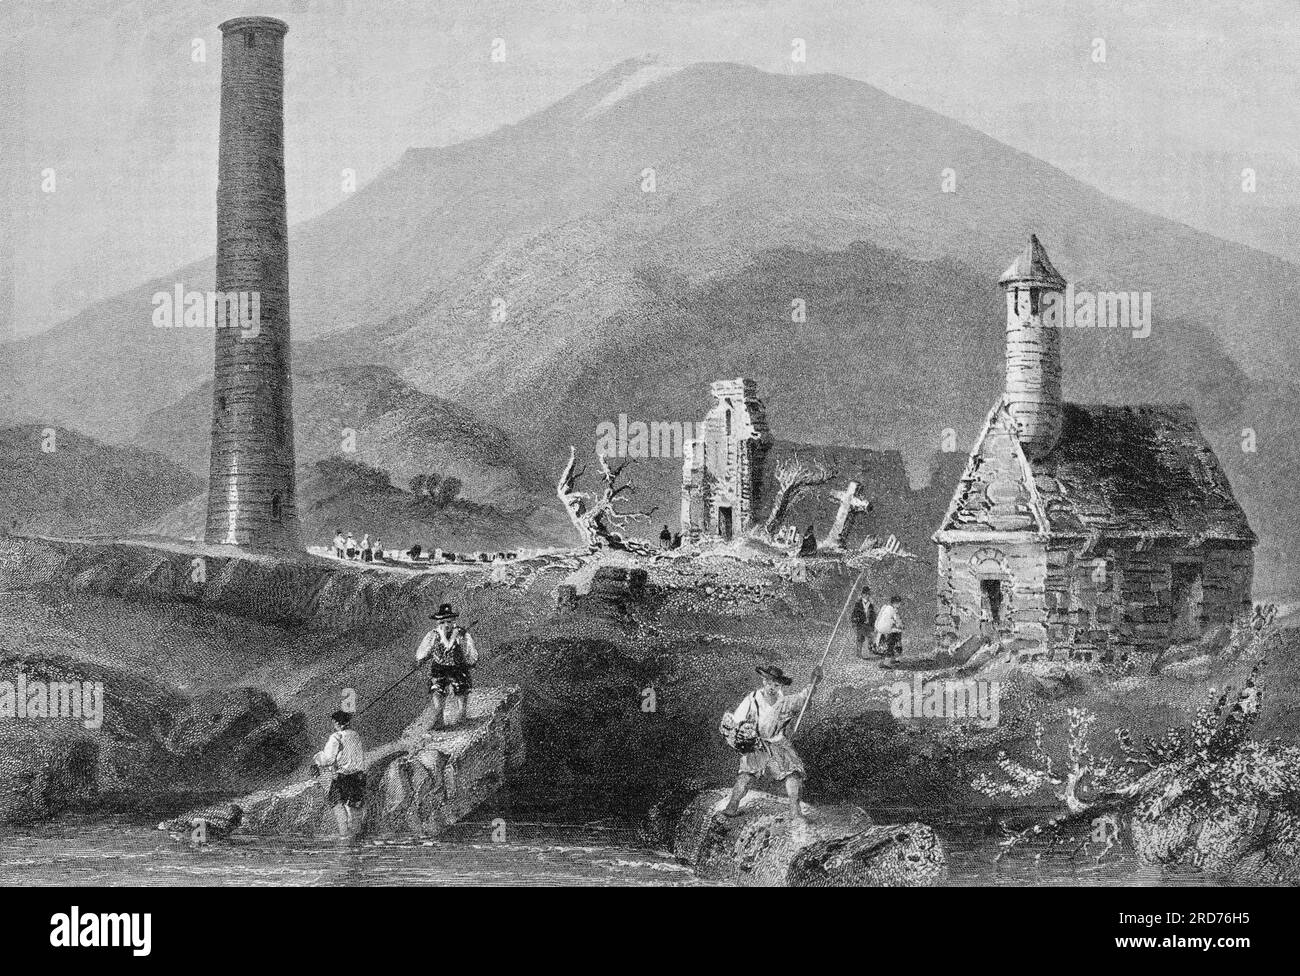 A illustration from the first half 18th Century of the roundtower and St Kevin's Kitchen in Glendalough, County Wicklow, Ireland. The early Medieval monastic settlement was founded in the 6th century by St Kevin, a descendant of one of the ruling families in Leinster, whose fame as a holy man spread and he attracted numerous followers. The destruction of the settlement by English forces in 1398 left it a ruin but it continued as a church of local importance and a place of pilgrimage. Stock Photo